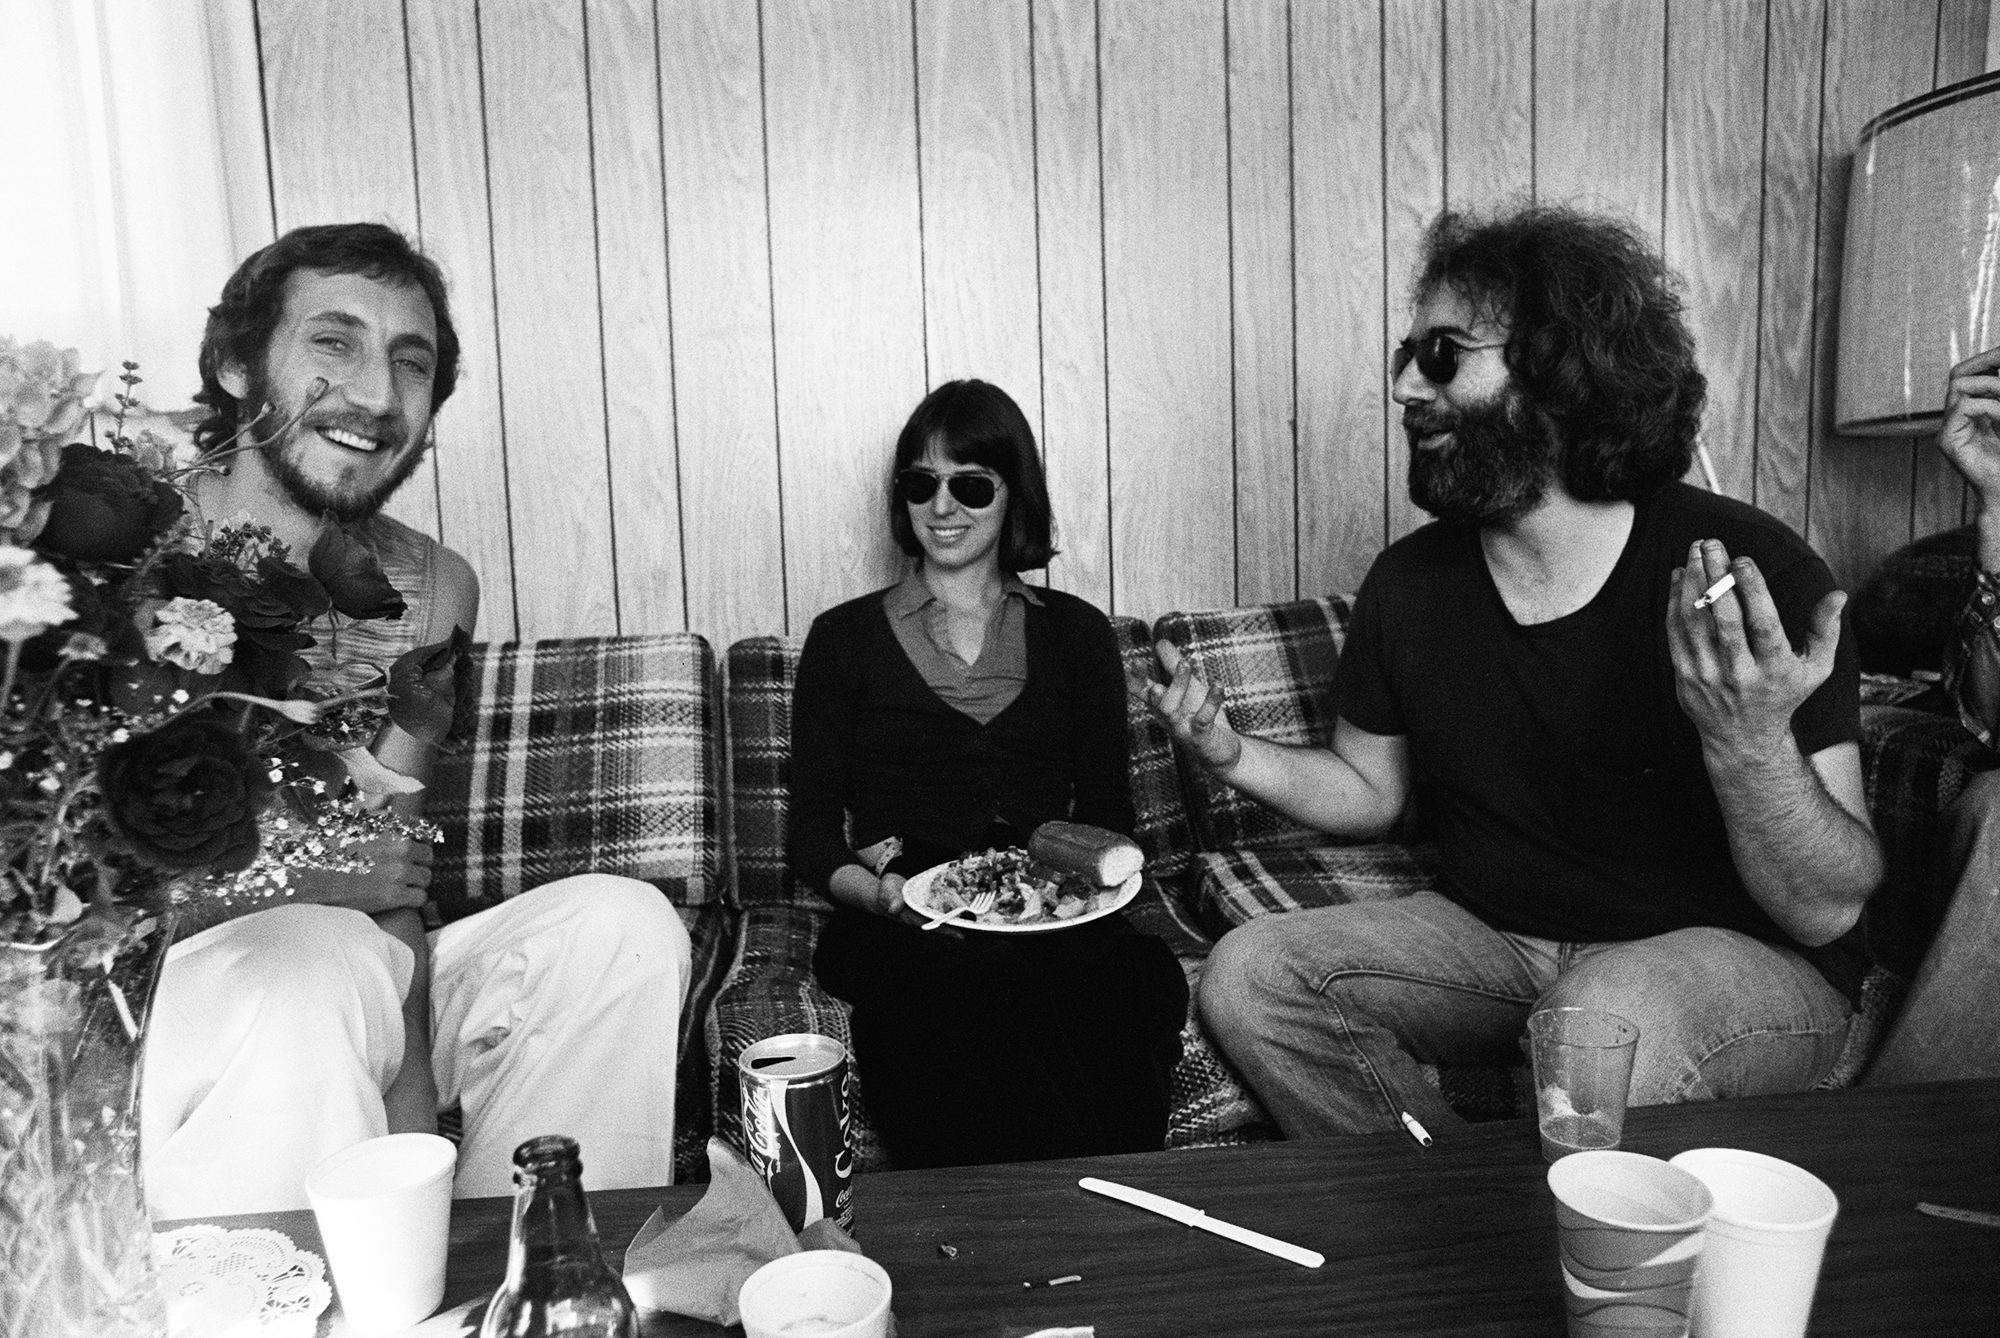 Pete Townsend, Deborah Koons and Jerry Garcia at Oakland Coliseum in Oakland, Calif., 1976.